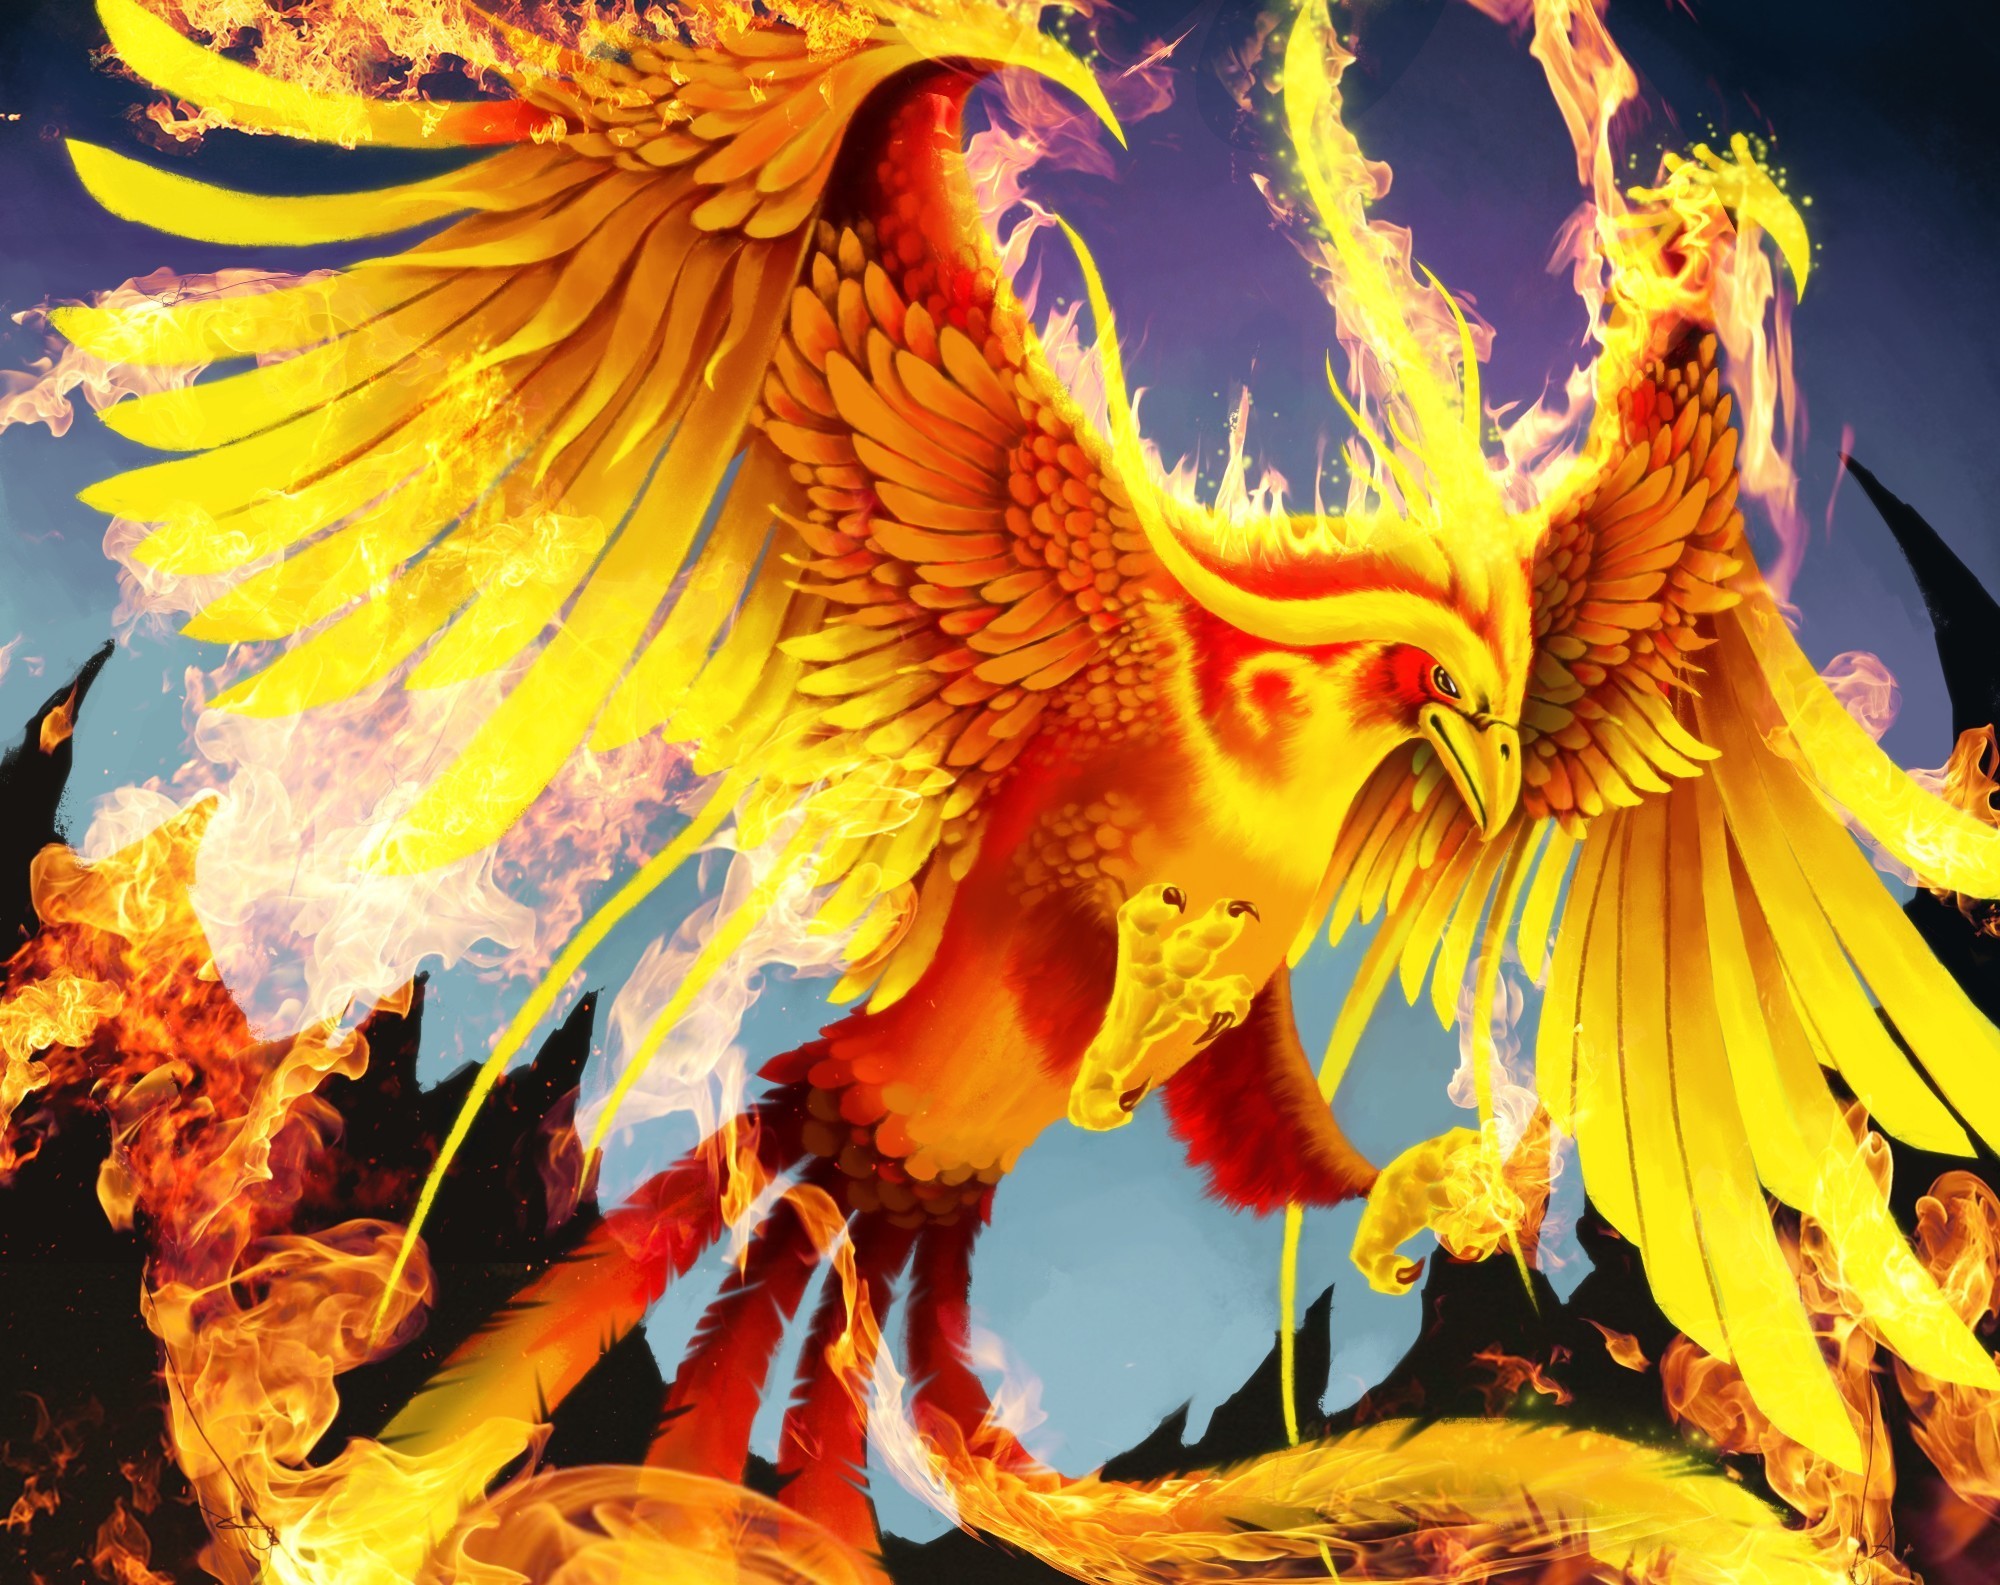 Magical Animals Birds Fire Phoenix Fantasy Wallpapers Hd Desktop And Mobile Backgrounds